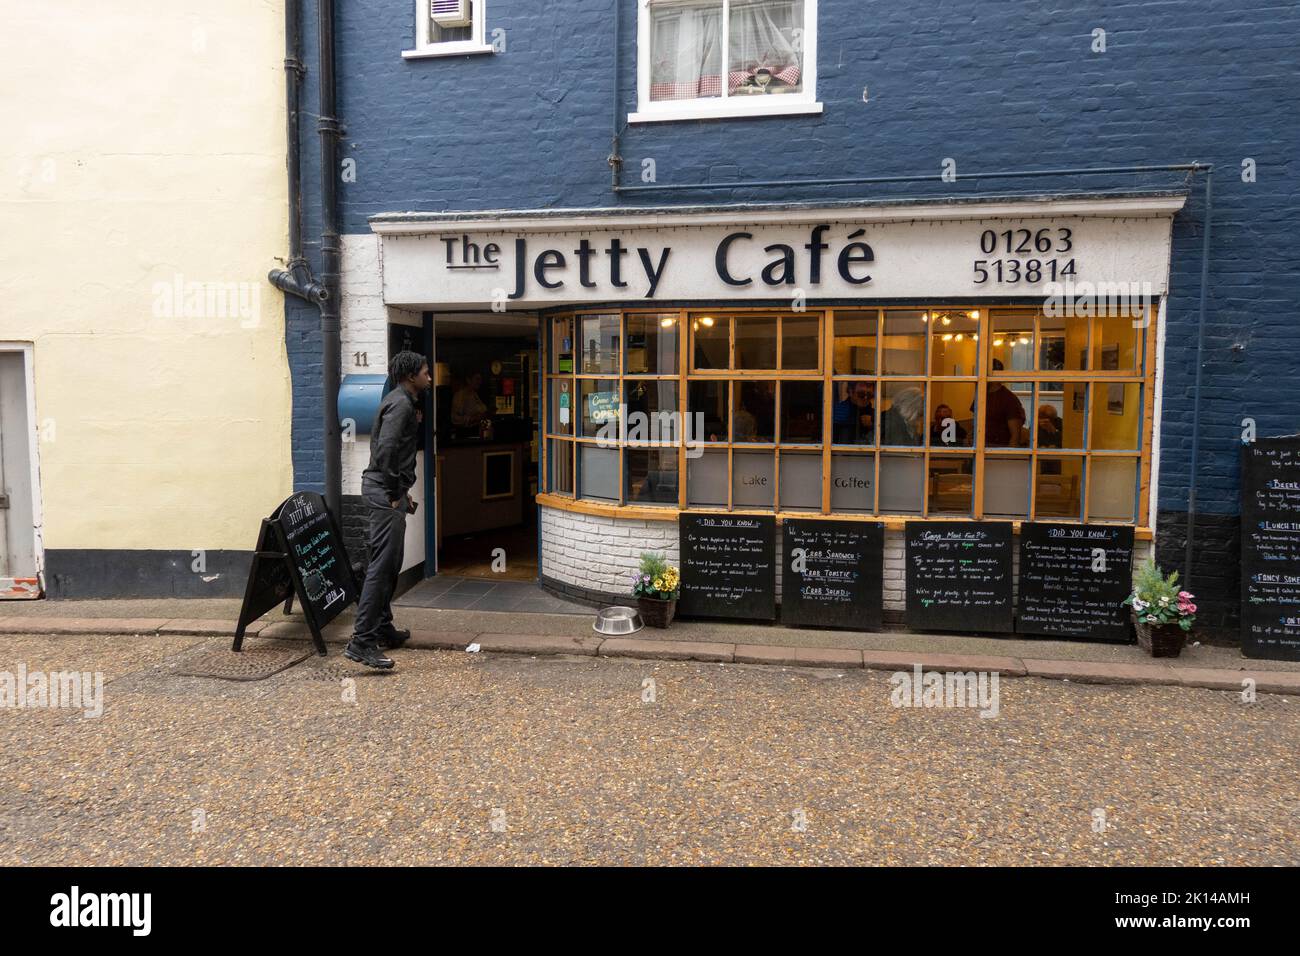 A view of the Jetty Cafe in Cromer Norfolk England Uk Stock Photo